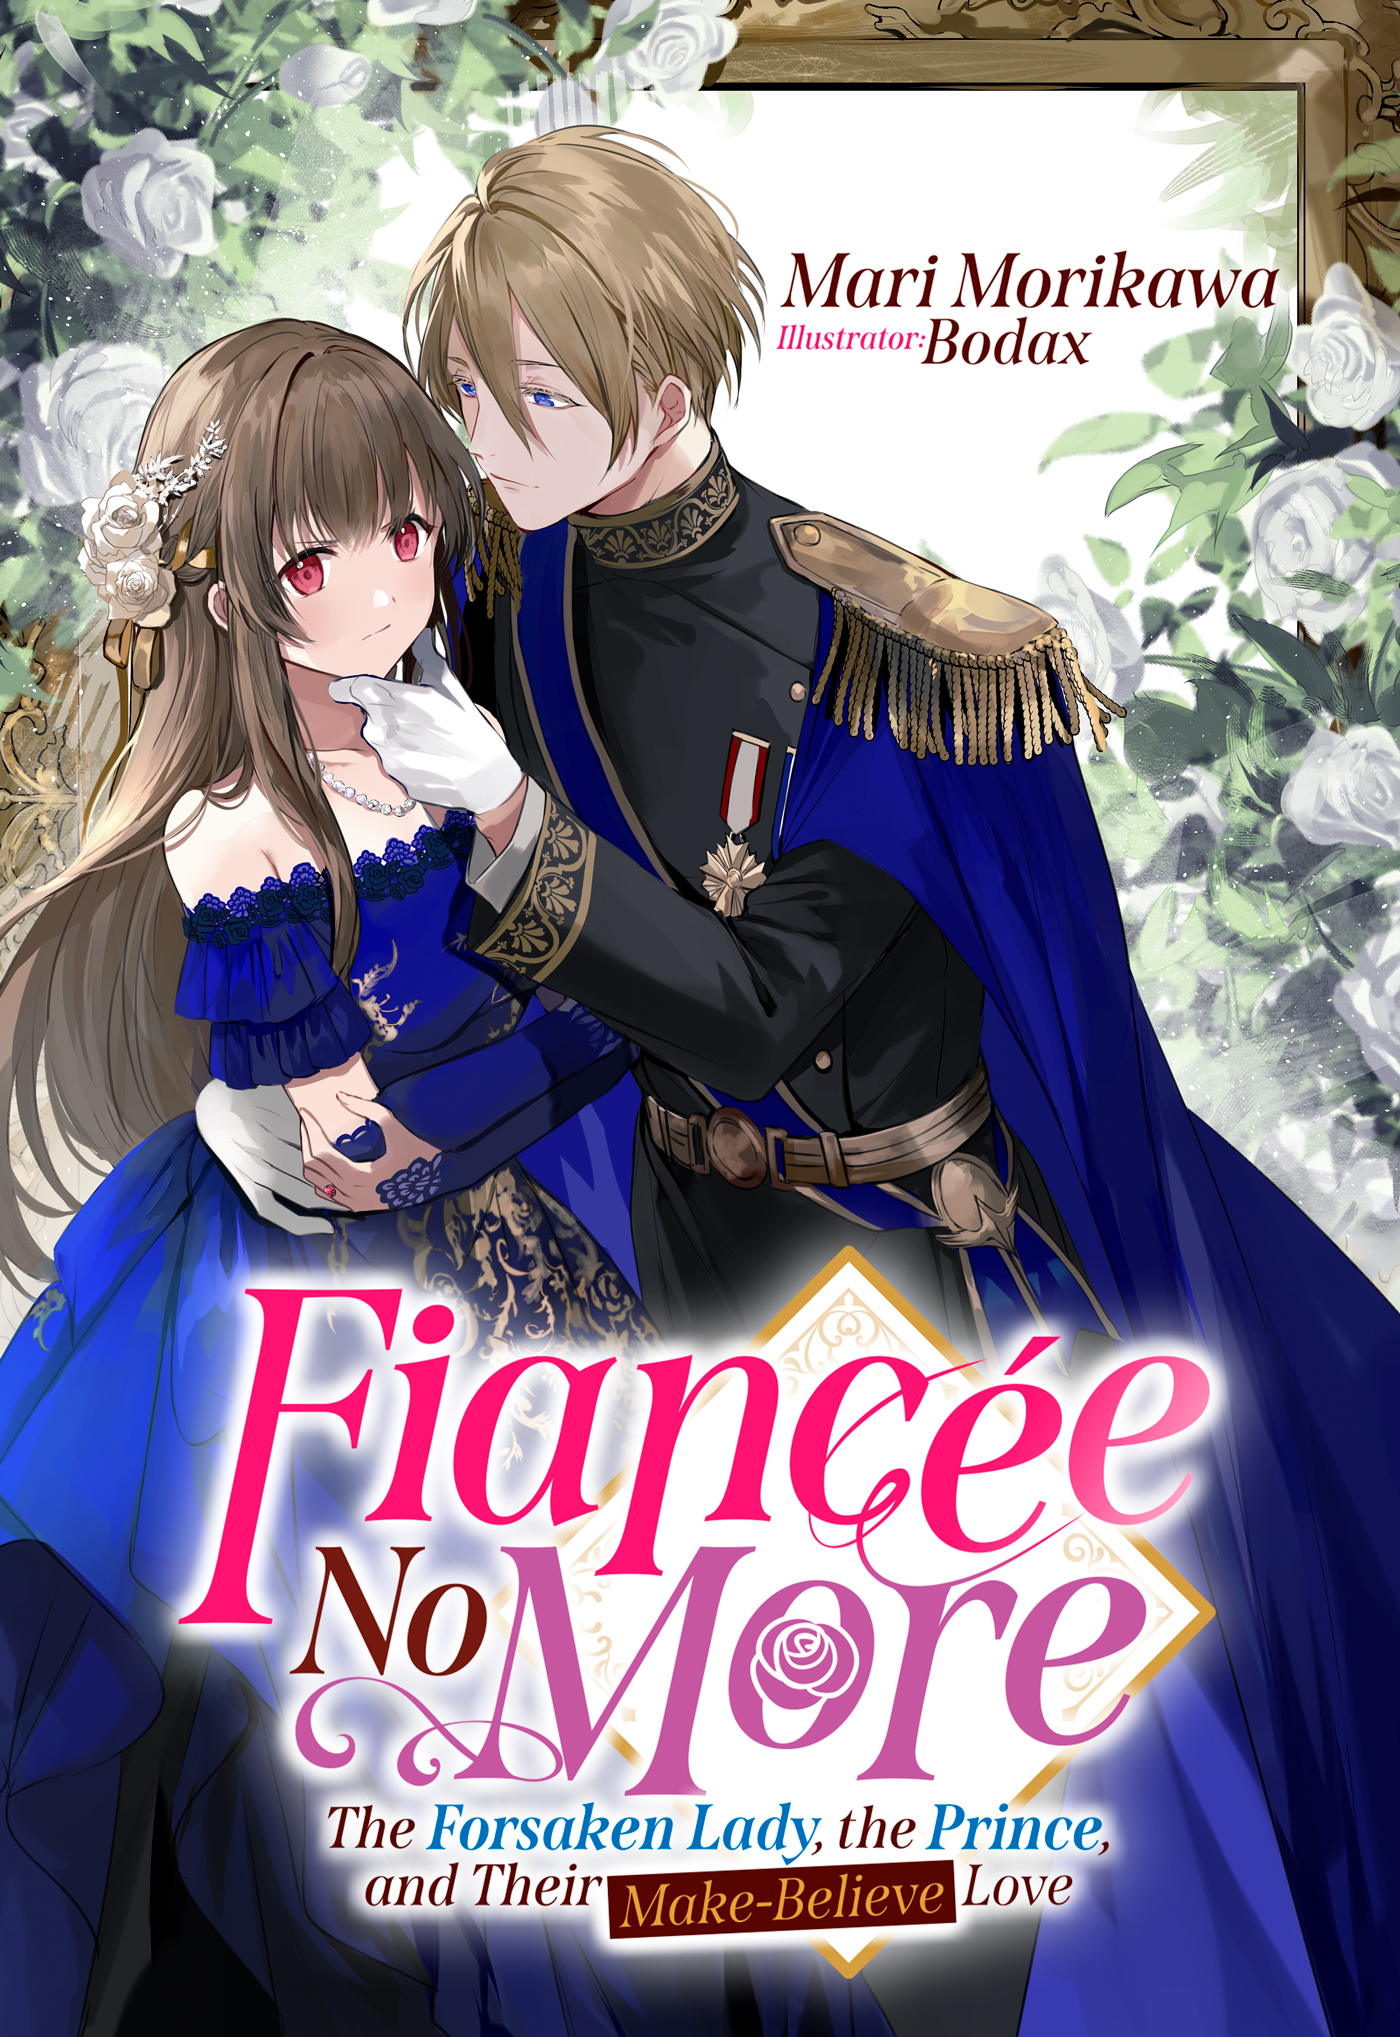 Fiancée No More: The Forsaken Lady, the Prince, and Their Make-Believe Love by Mari Morikawa (Story), Bodax (Illustrations)